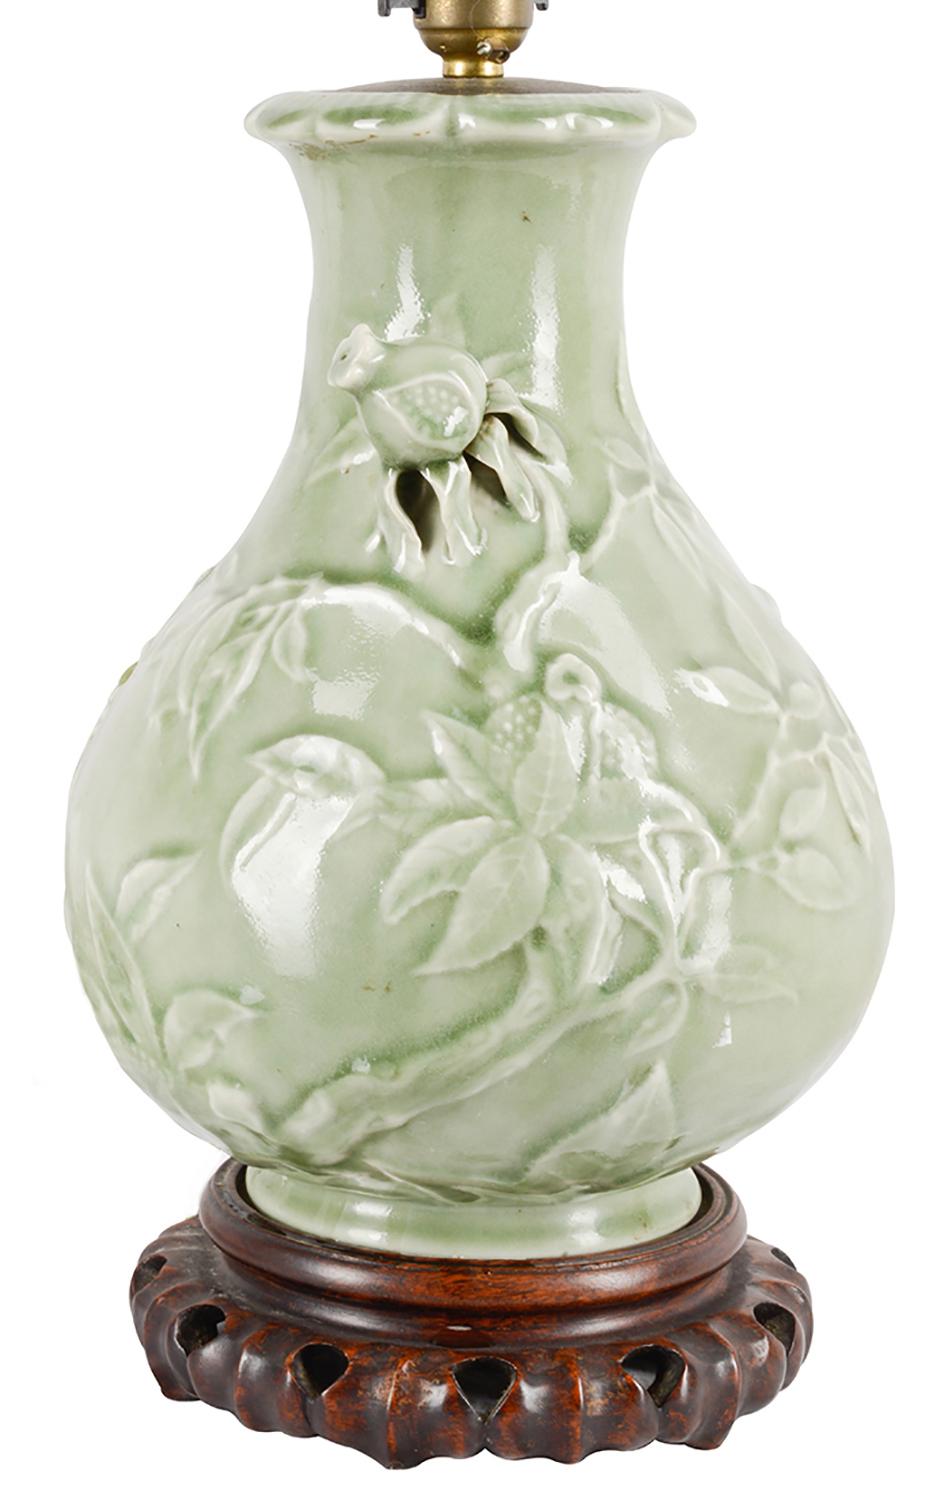 A good quality early 20th century Chinese celadon vase, with wonderful raised and pierced decoration of exotic flowers and leaves. Raised on a carved hardwood stand. Measures: 34cm (13.5